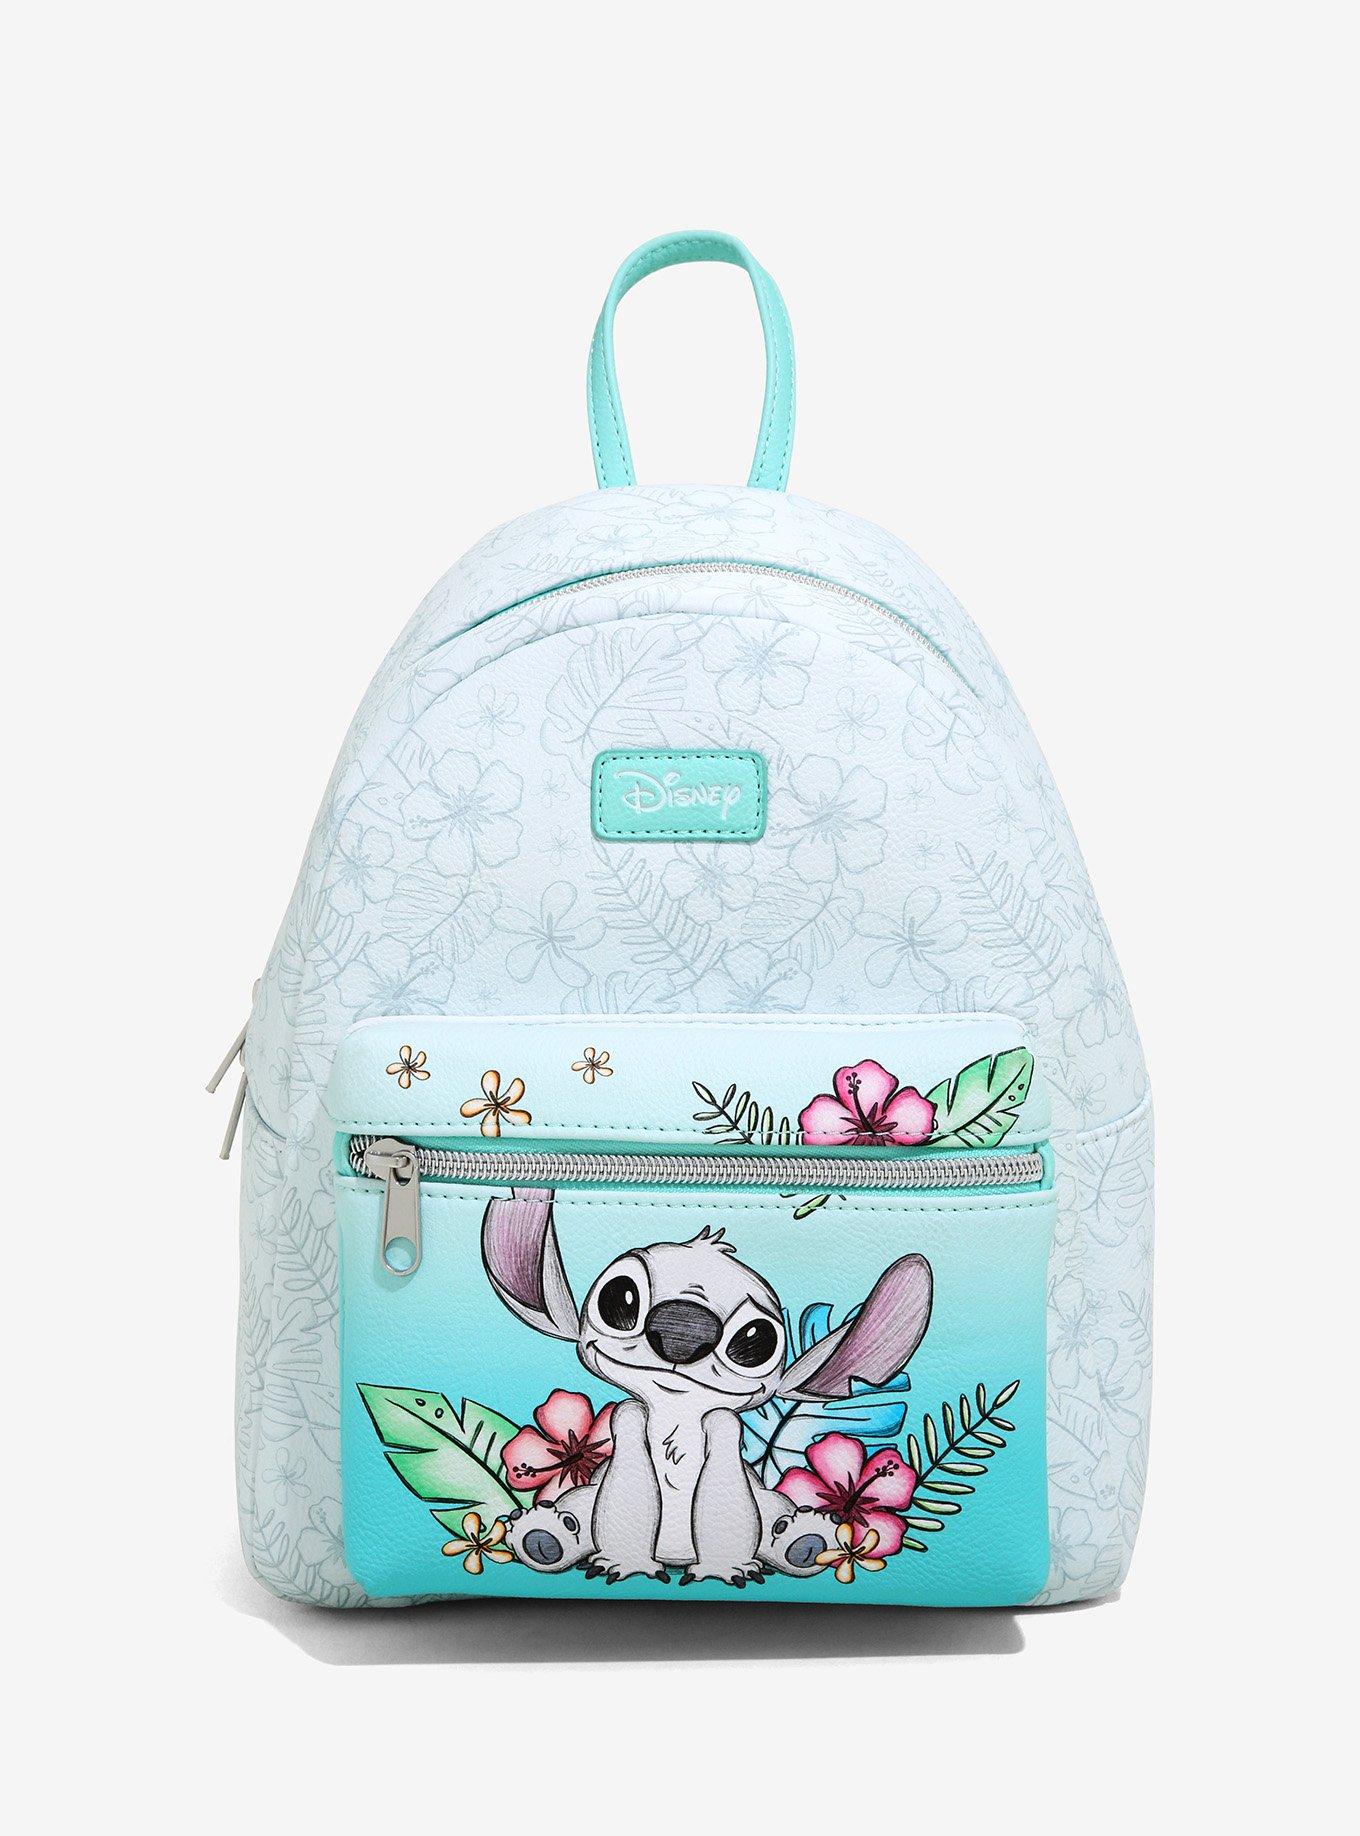 Disney Bundle Stitch School Supplies Bundle Lilo and Stitch School Bag Set  - 4 Pc Stitch Backpack for Girls with Monster Stickers, Hibiscus Stampers